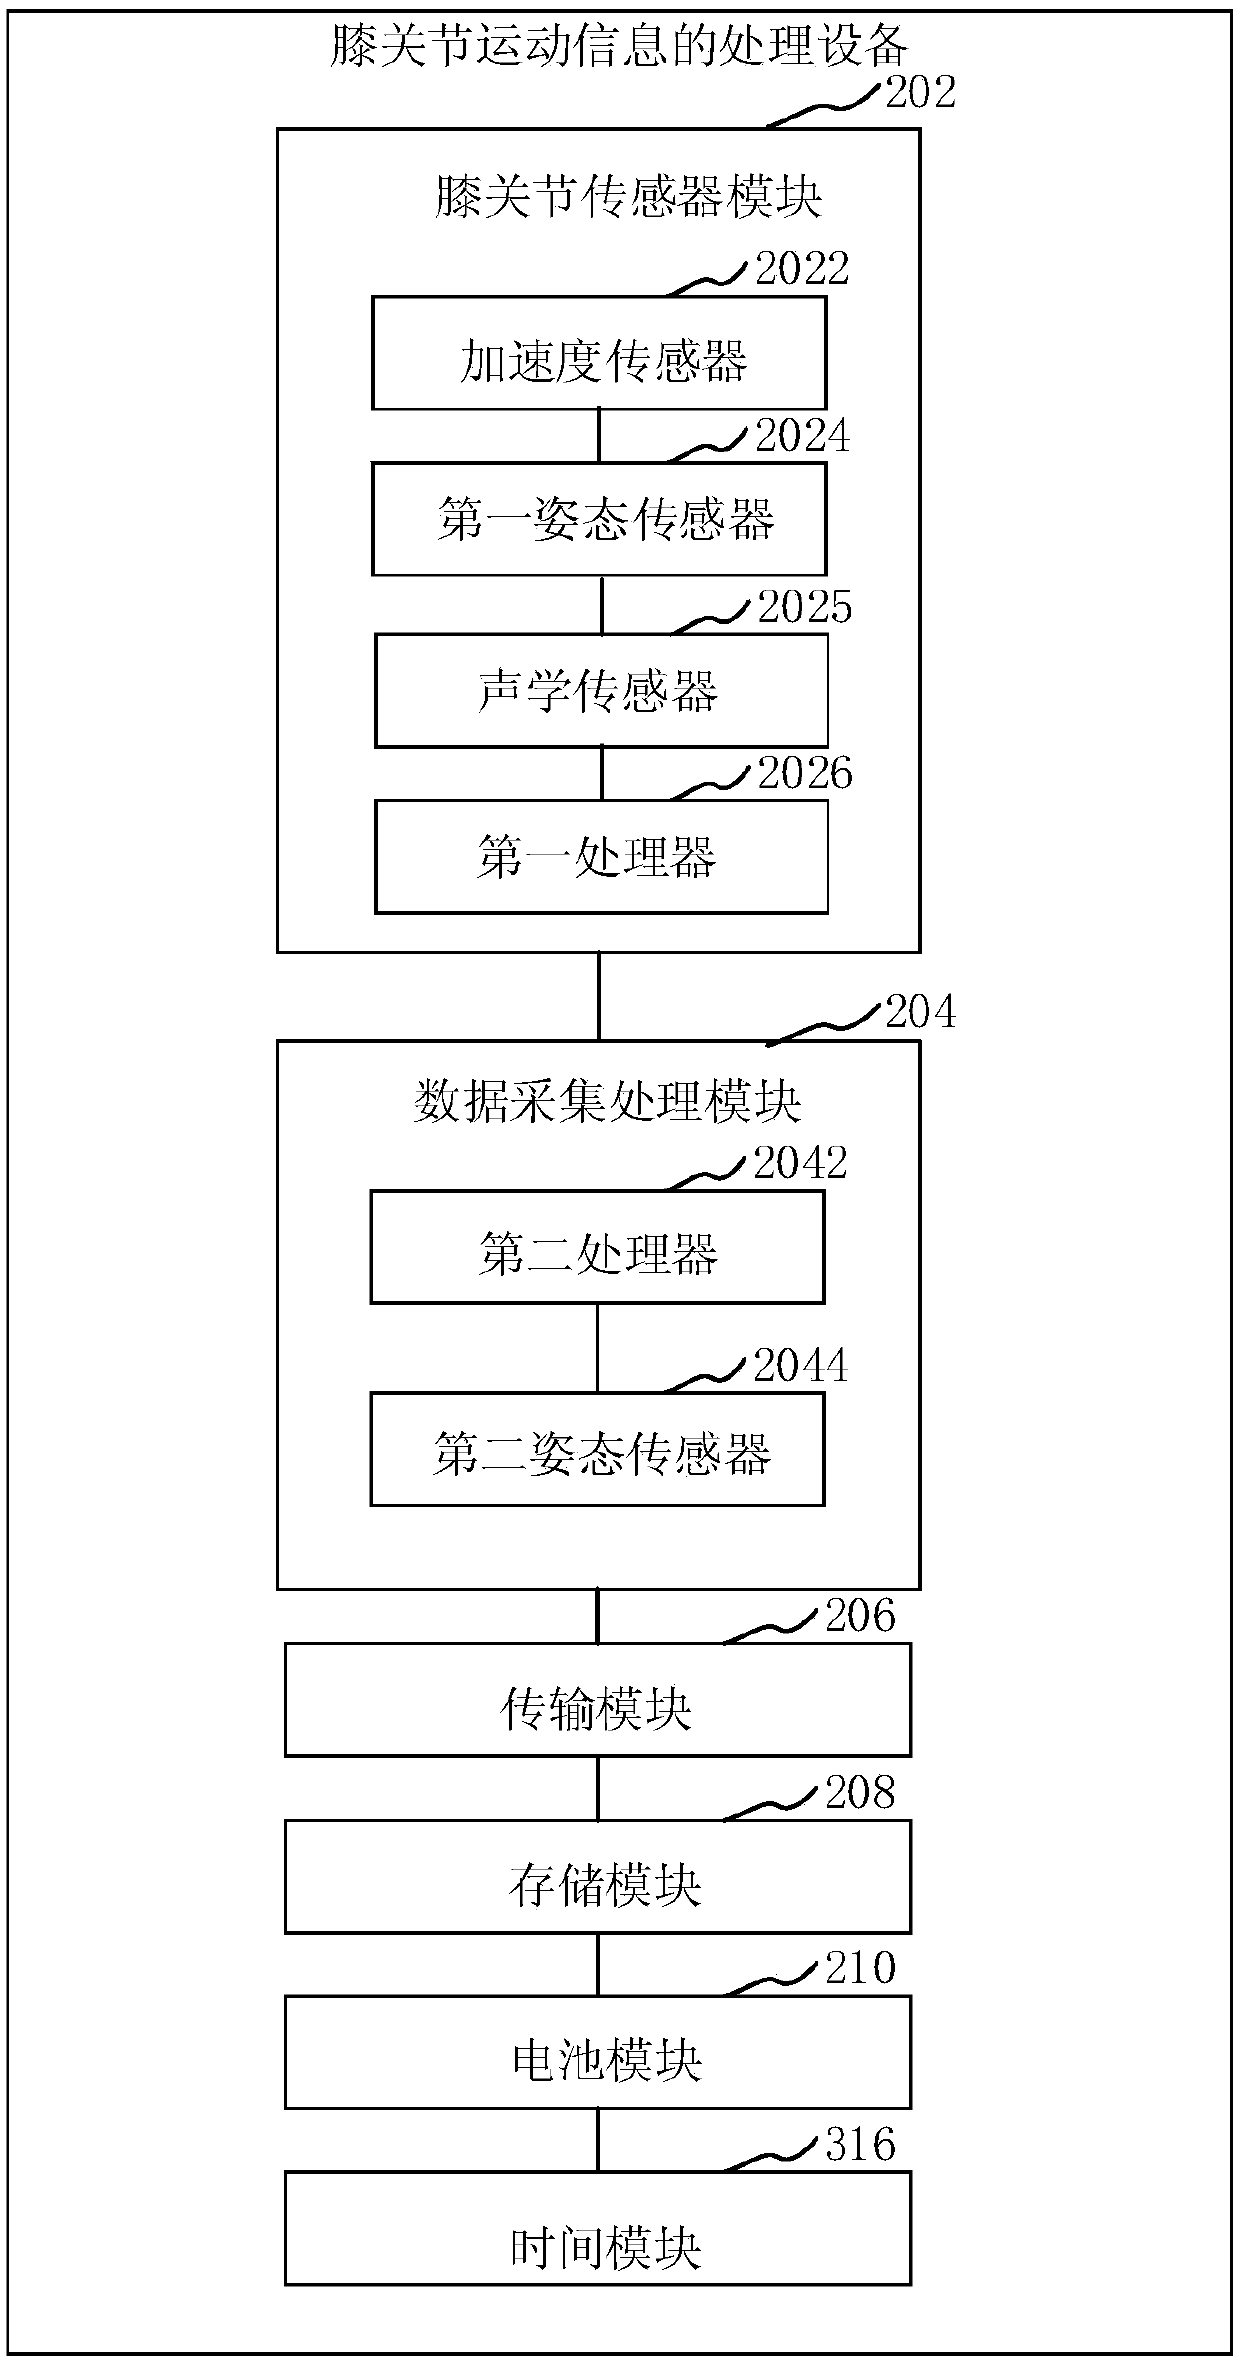 Knee joint motion information processing equipment